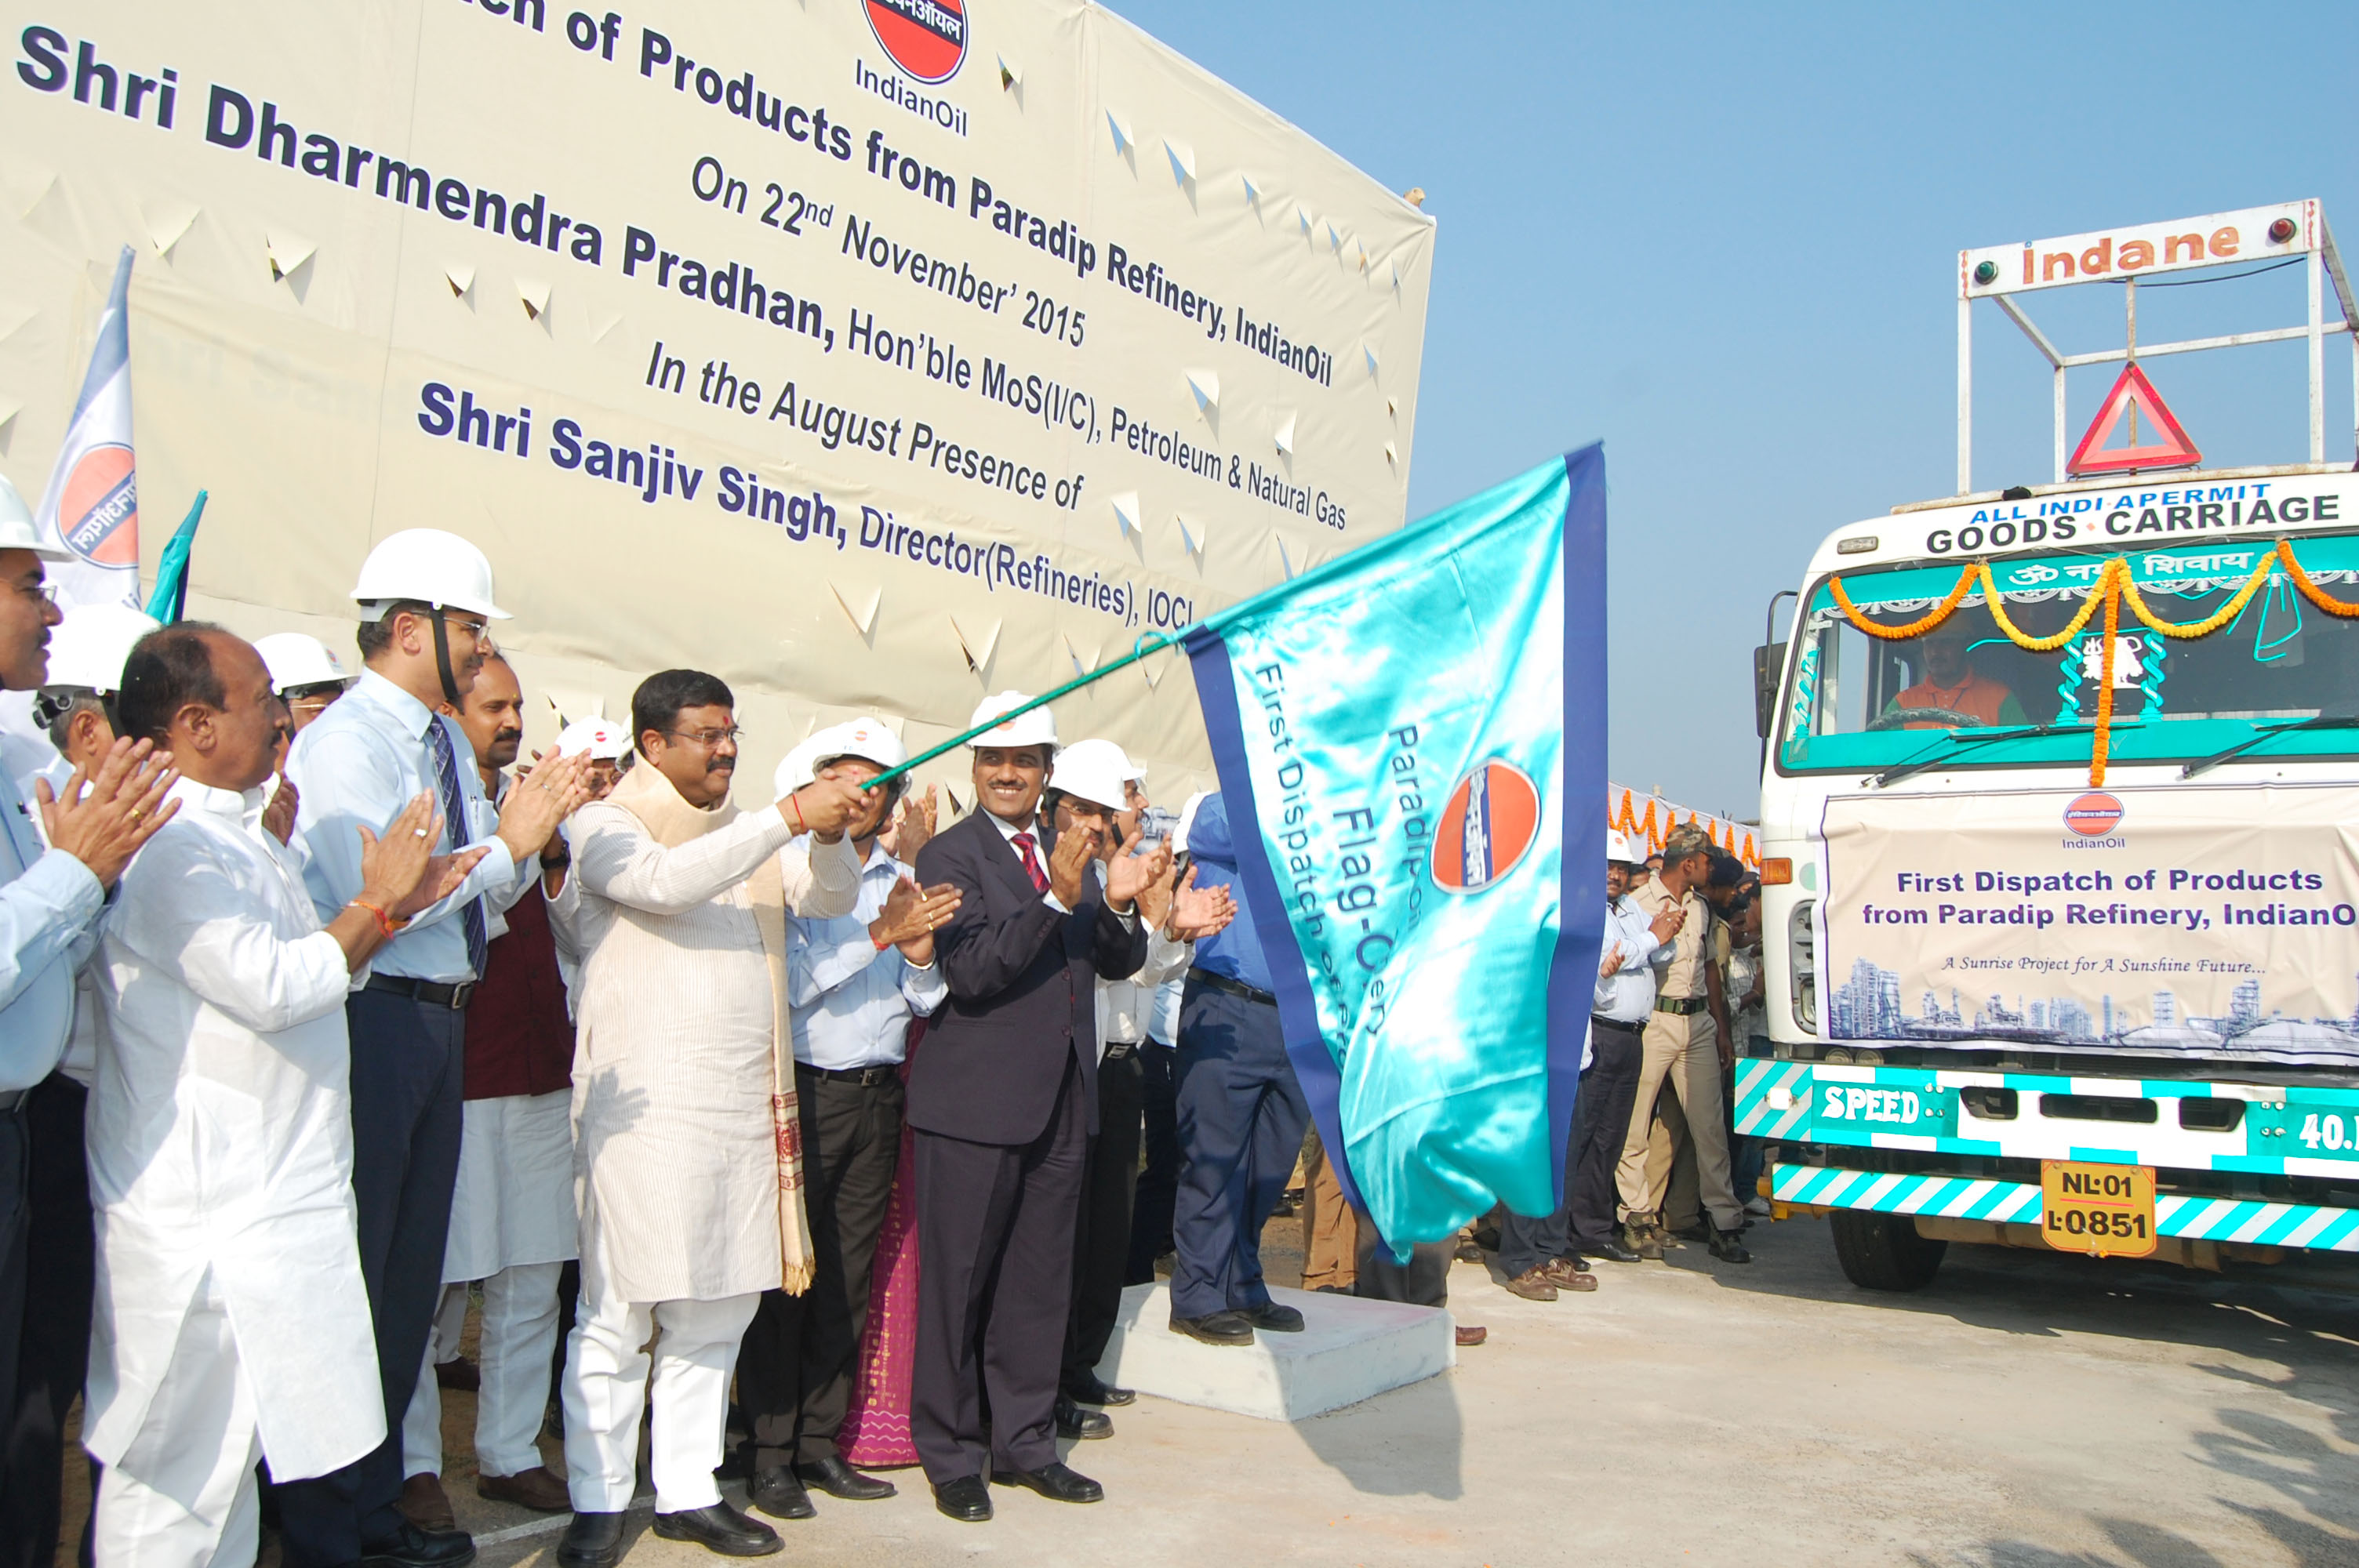 Hon'ble MoS(IC), P&NG Flanging-off the first dispatch of consignment of products from Paradip Refinery (2)